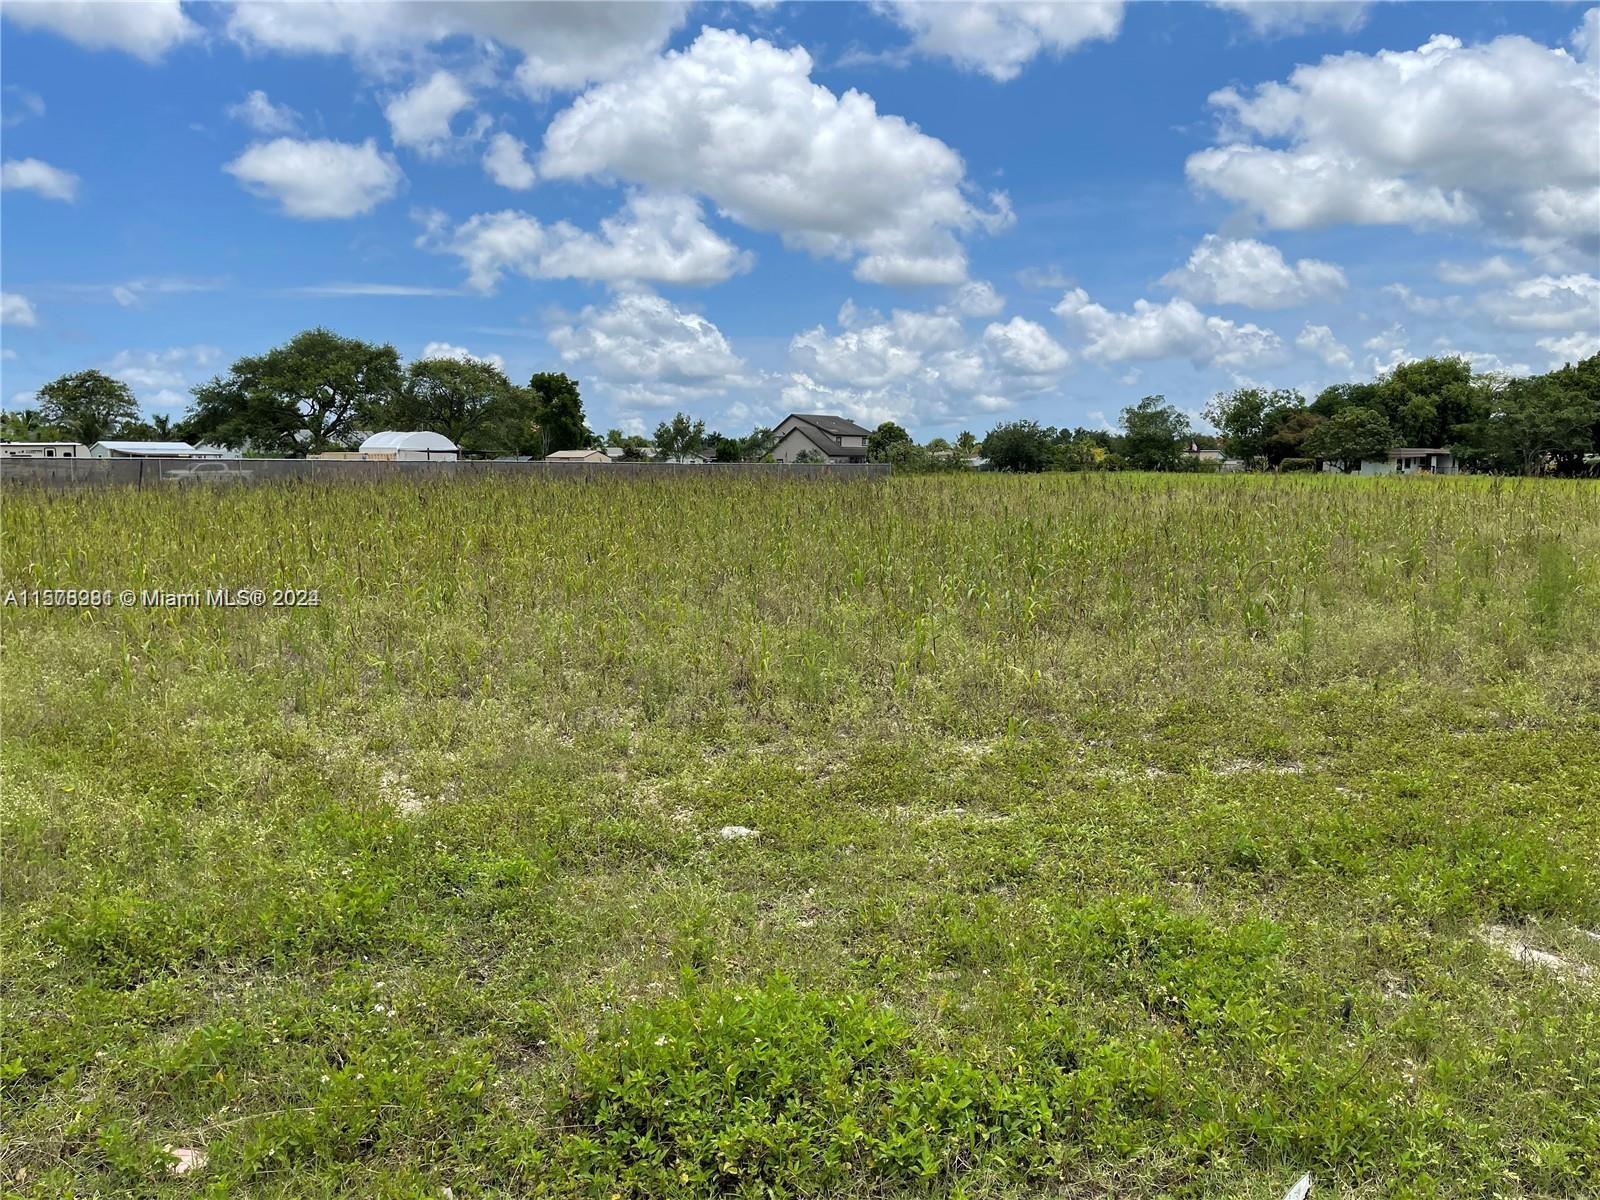 Photo of 320XX SW 202 Ave in Unincorporated Dade County, FL